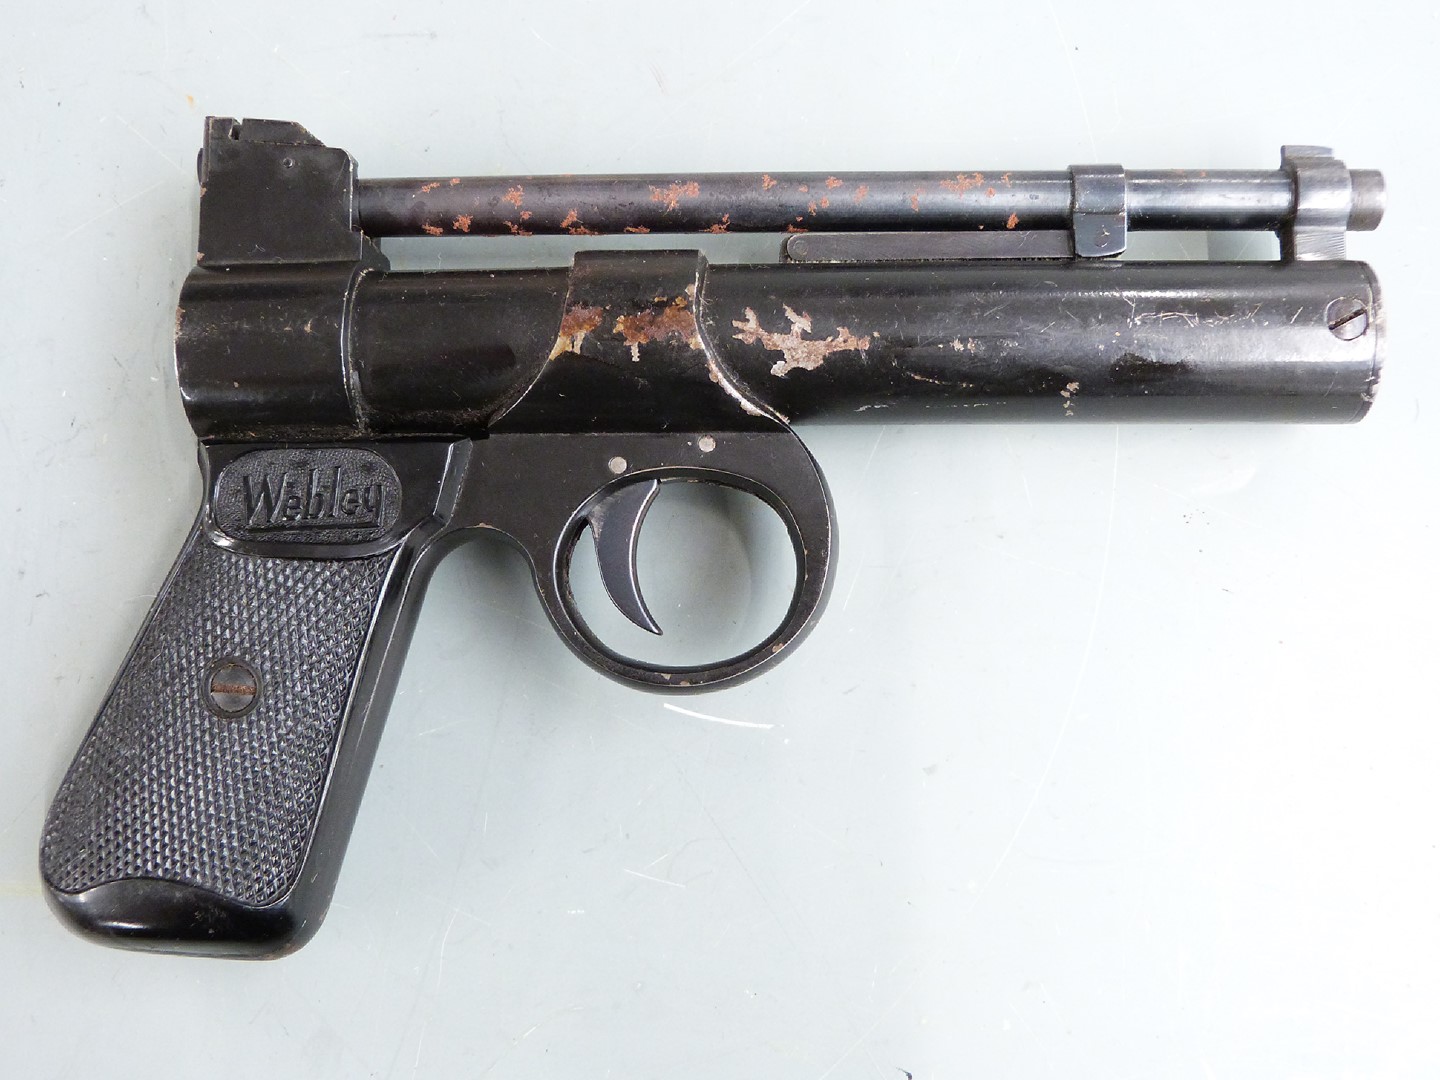 Webley Junior .177 air pistol with named and chequered grips, serial number 248, in original box. - Image 2 of 5